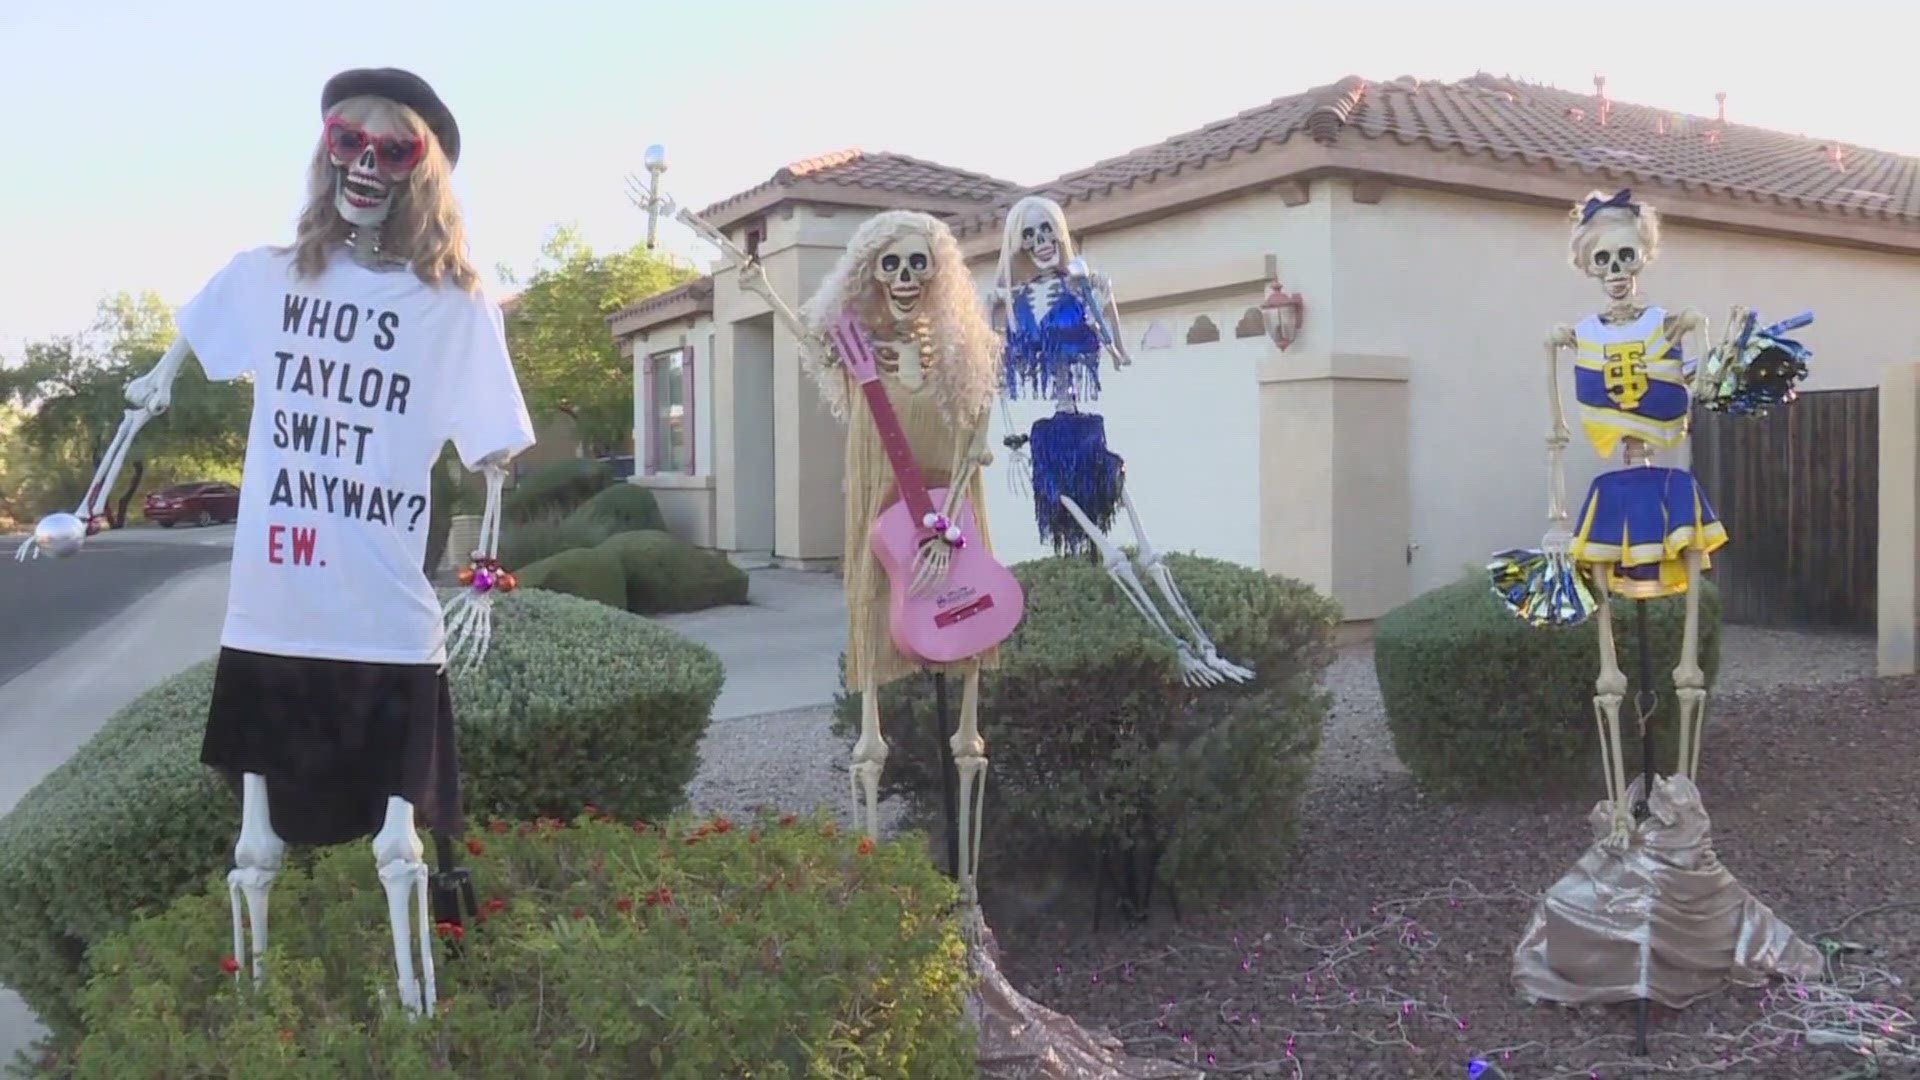 Where in Phoenix is the Taylor Swift Halloween house?